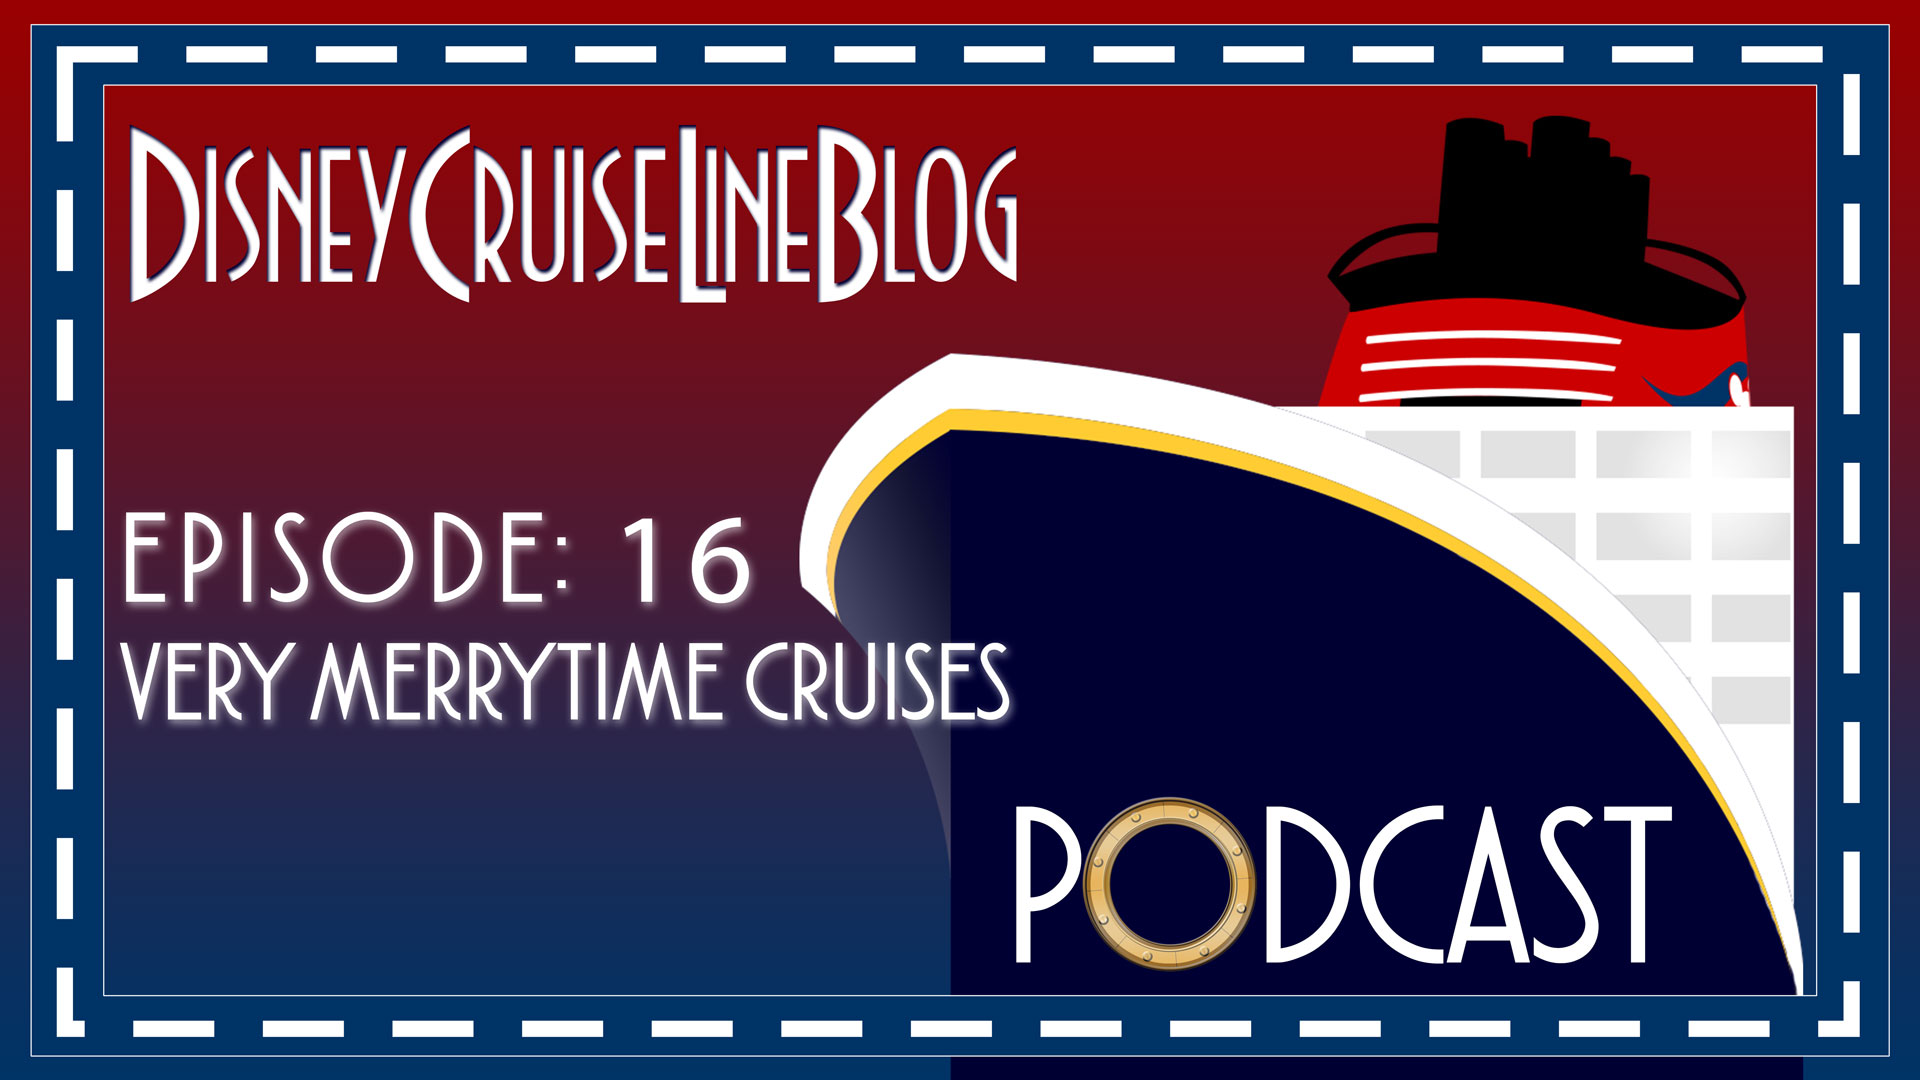 DCL Blog Podcast Episode 15 Very MerryTime